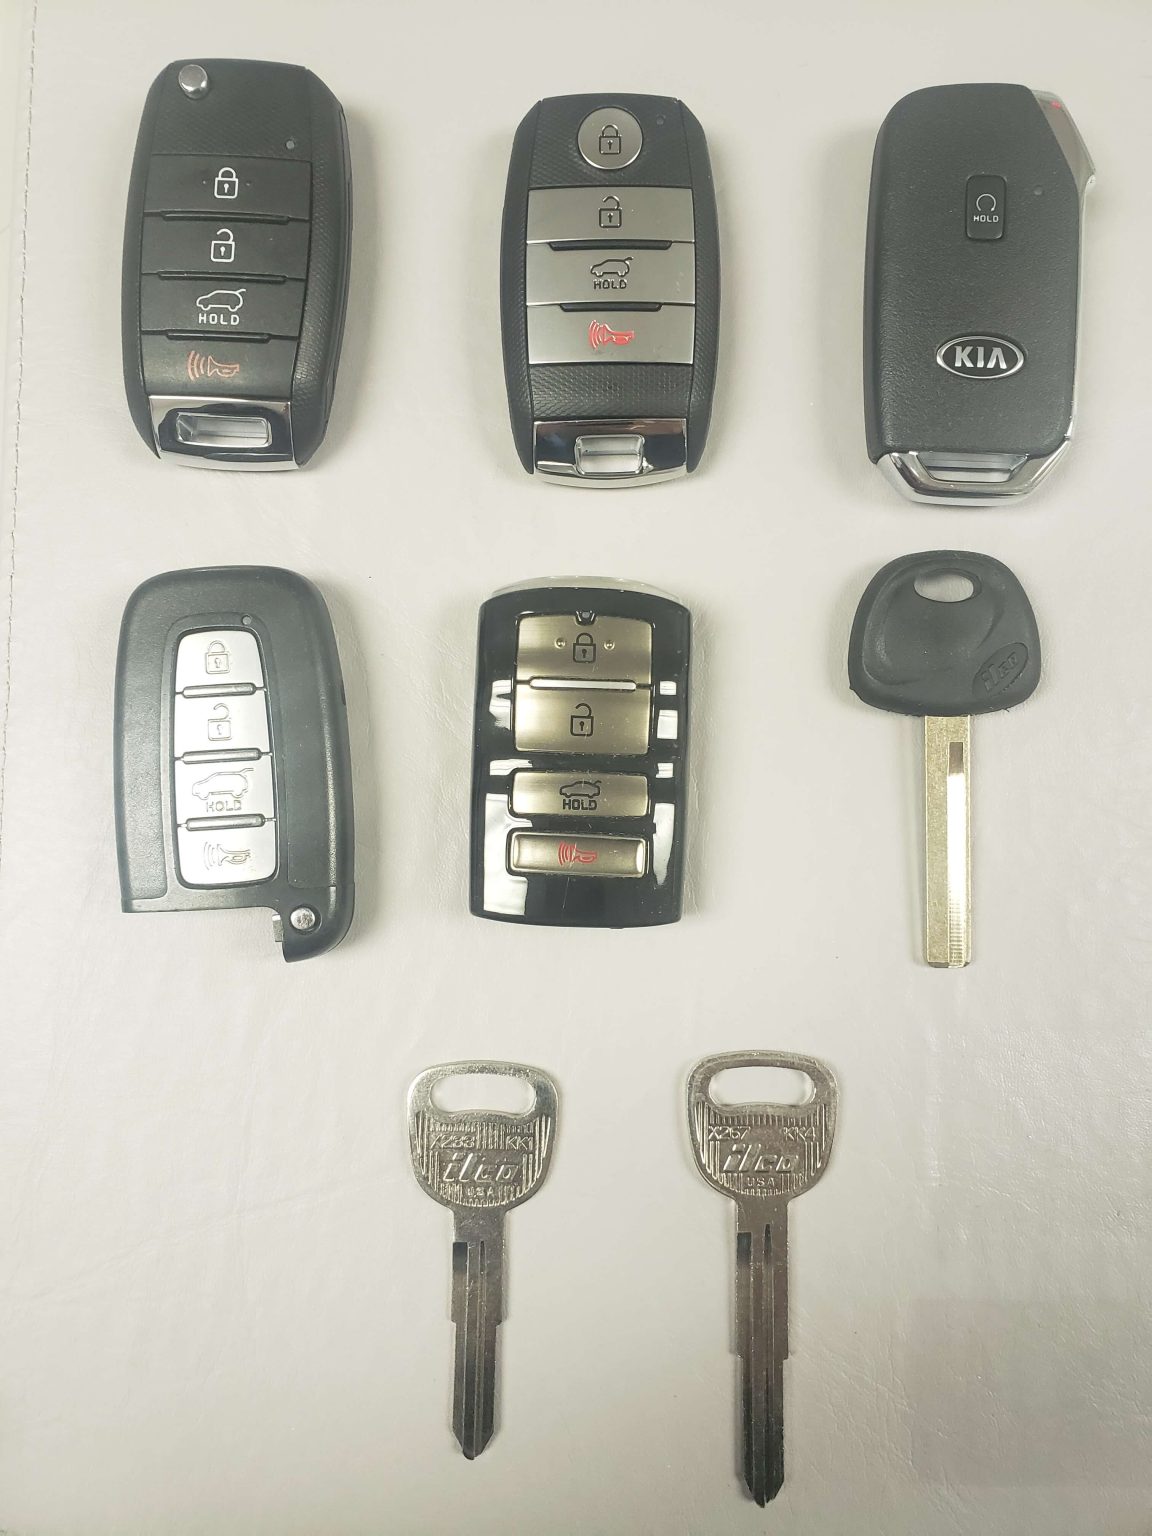 Kia Sorento Key Replacement What To Do, Options, Costs & More